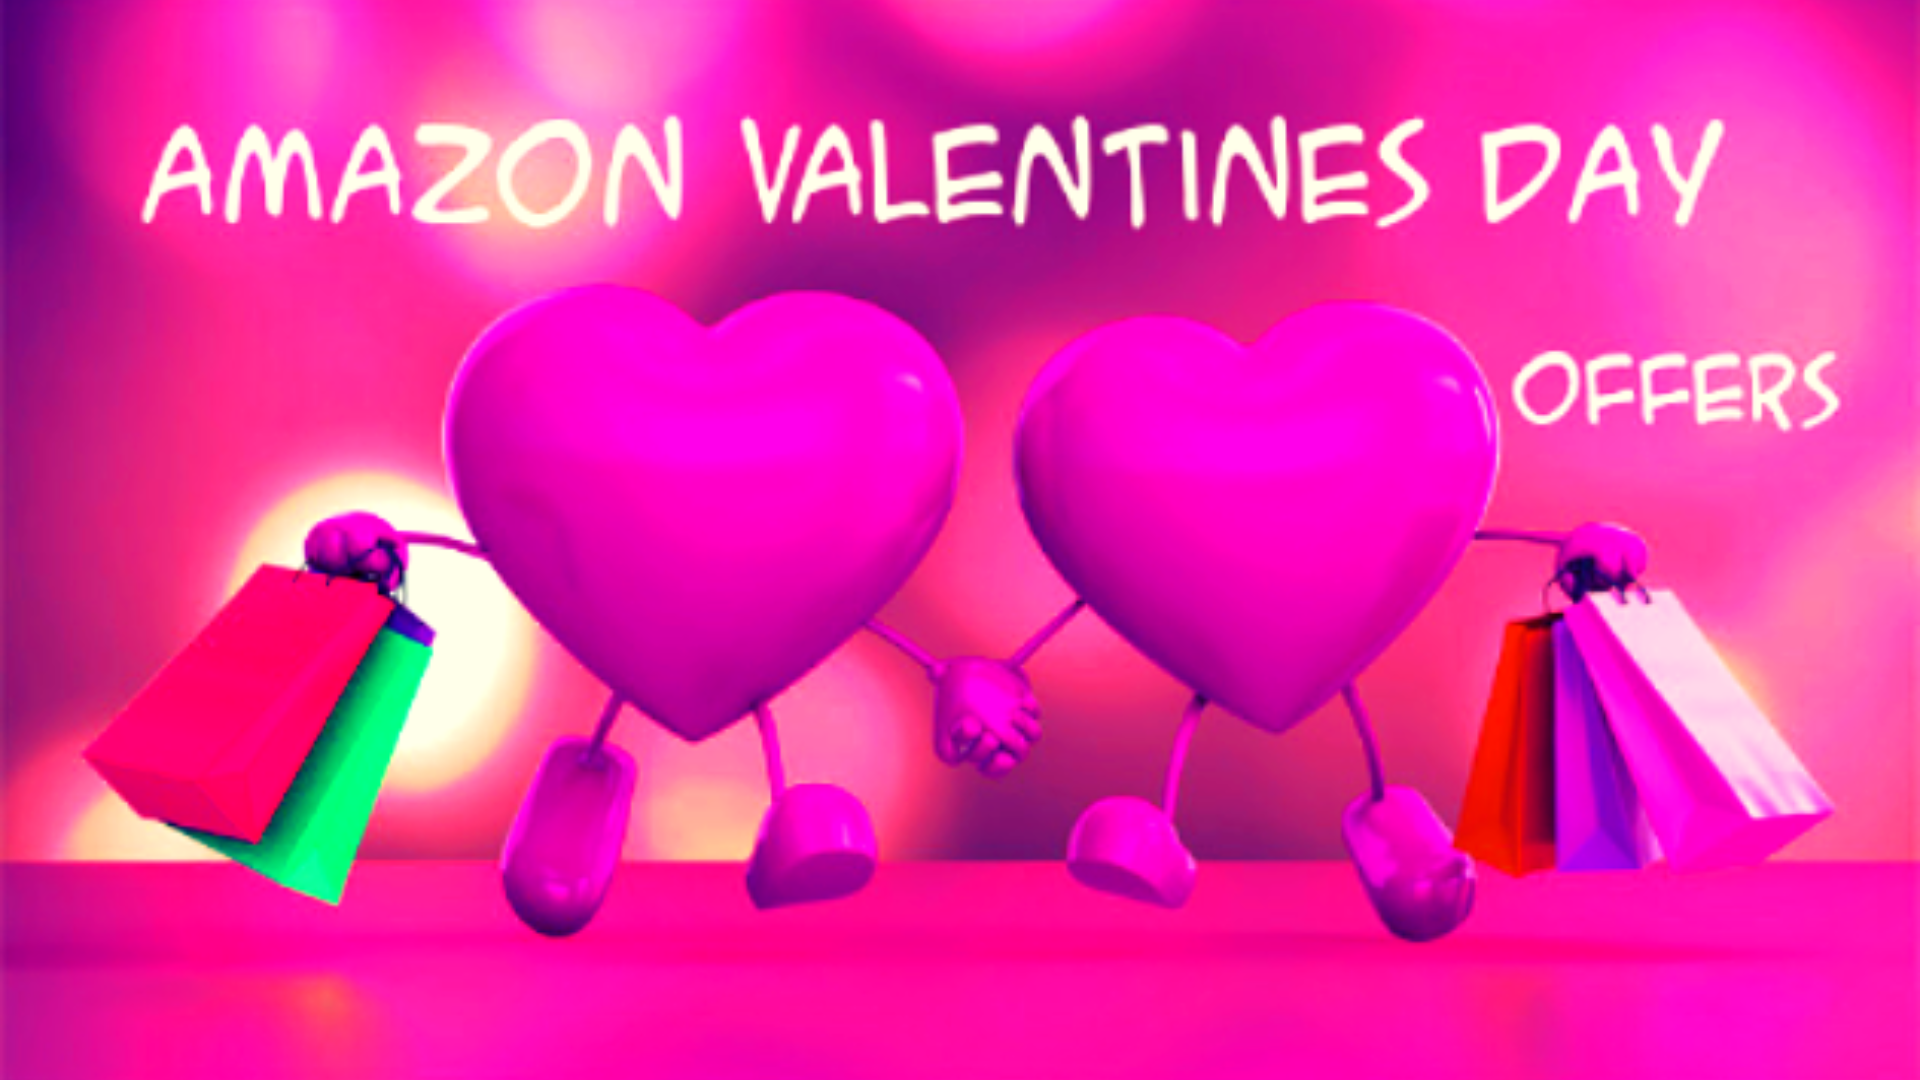 Amazon Valentine Day Offers - Up to 80% off on Gifts For Him & Her